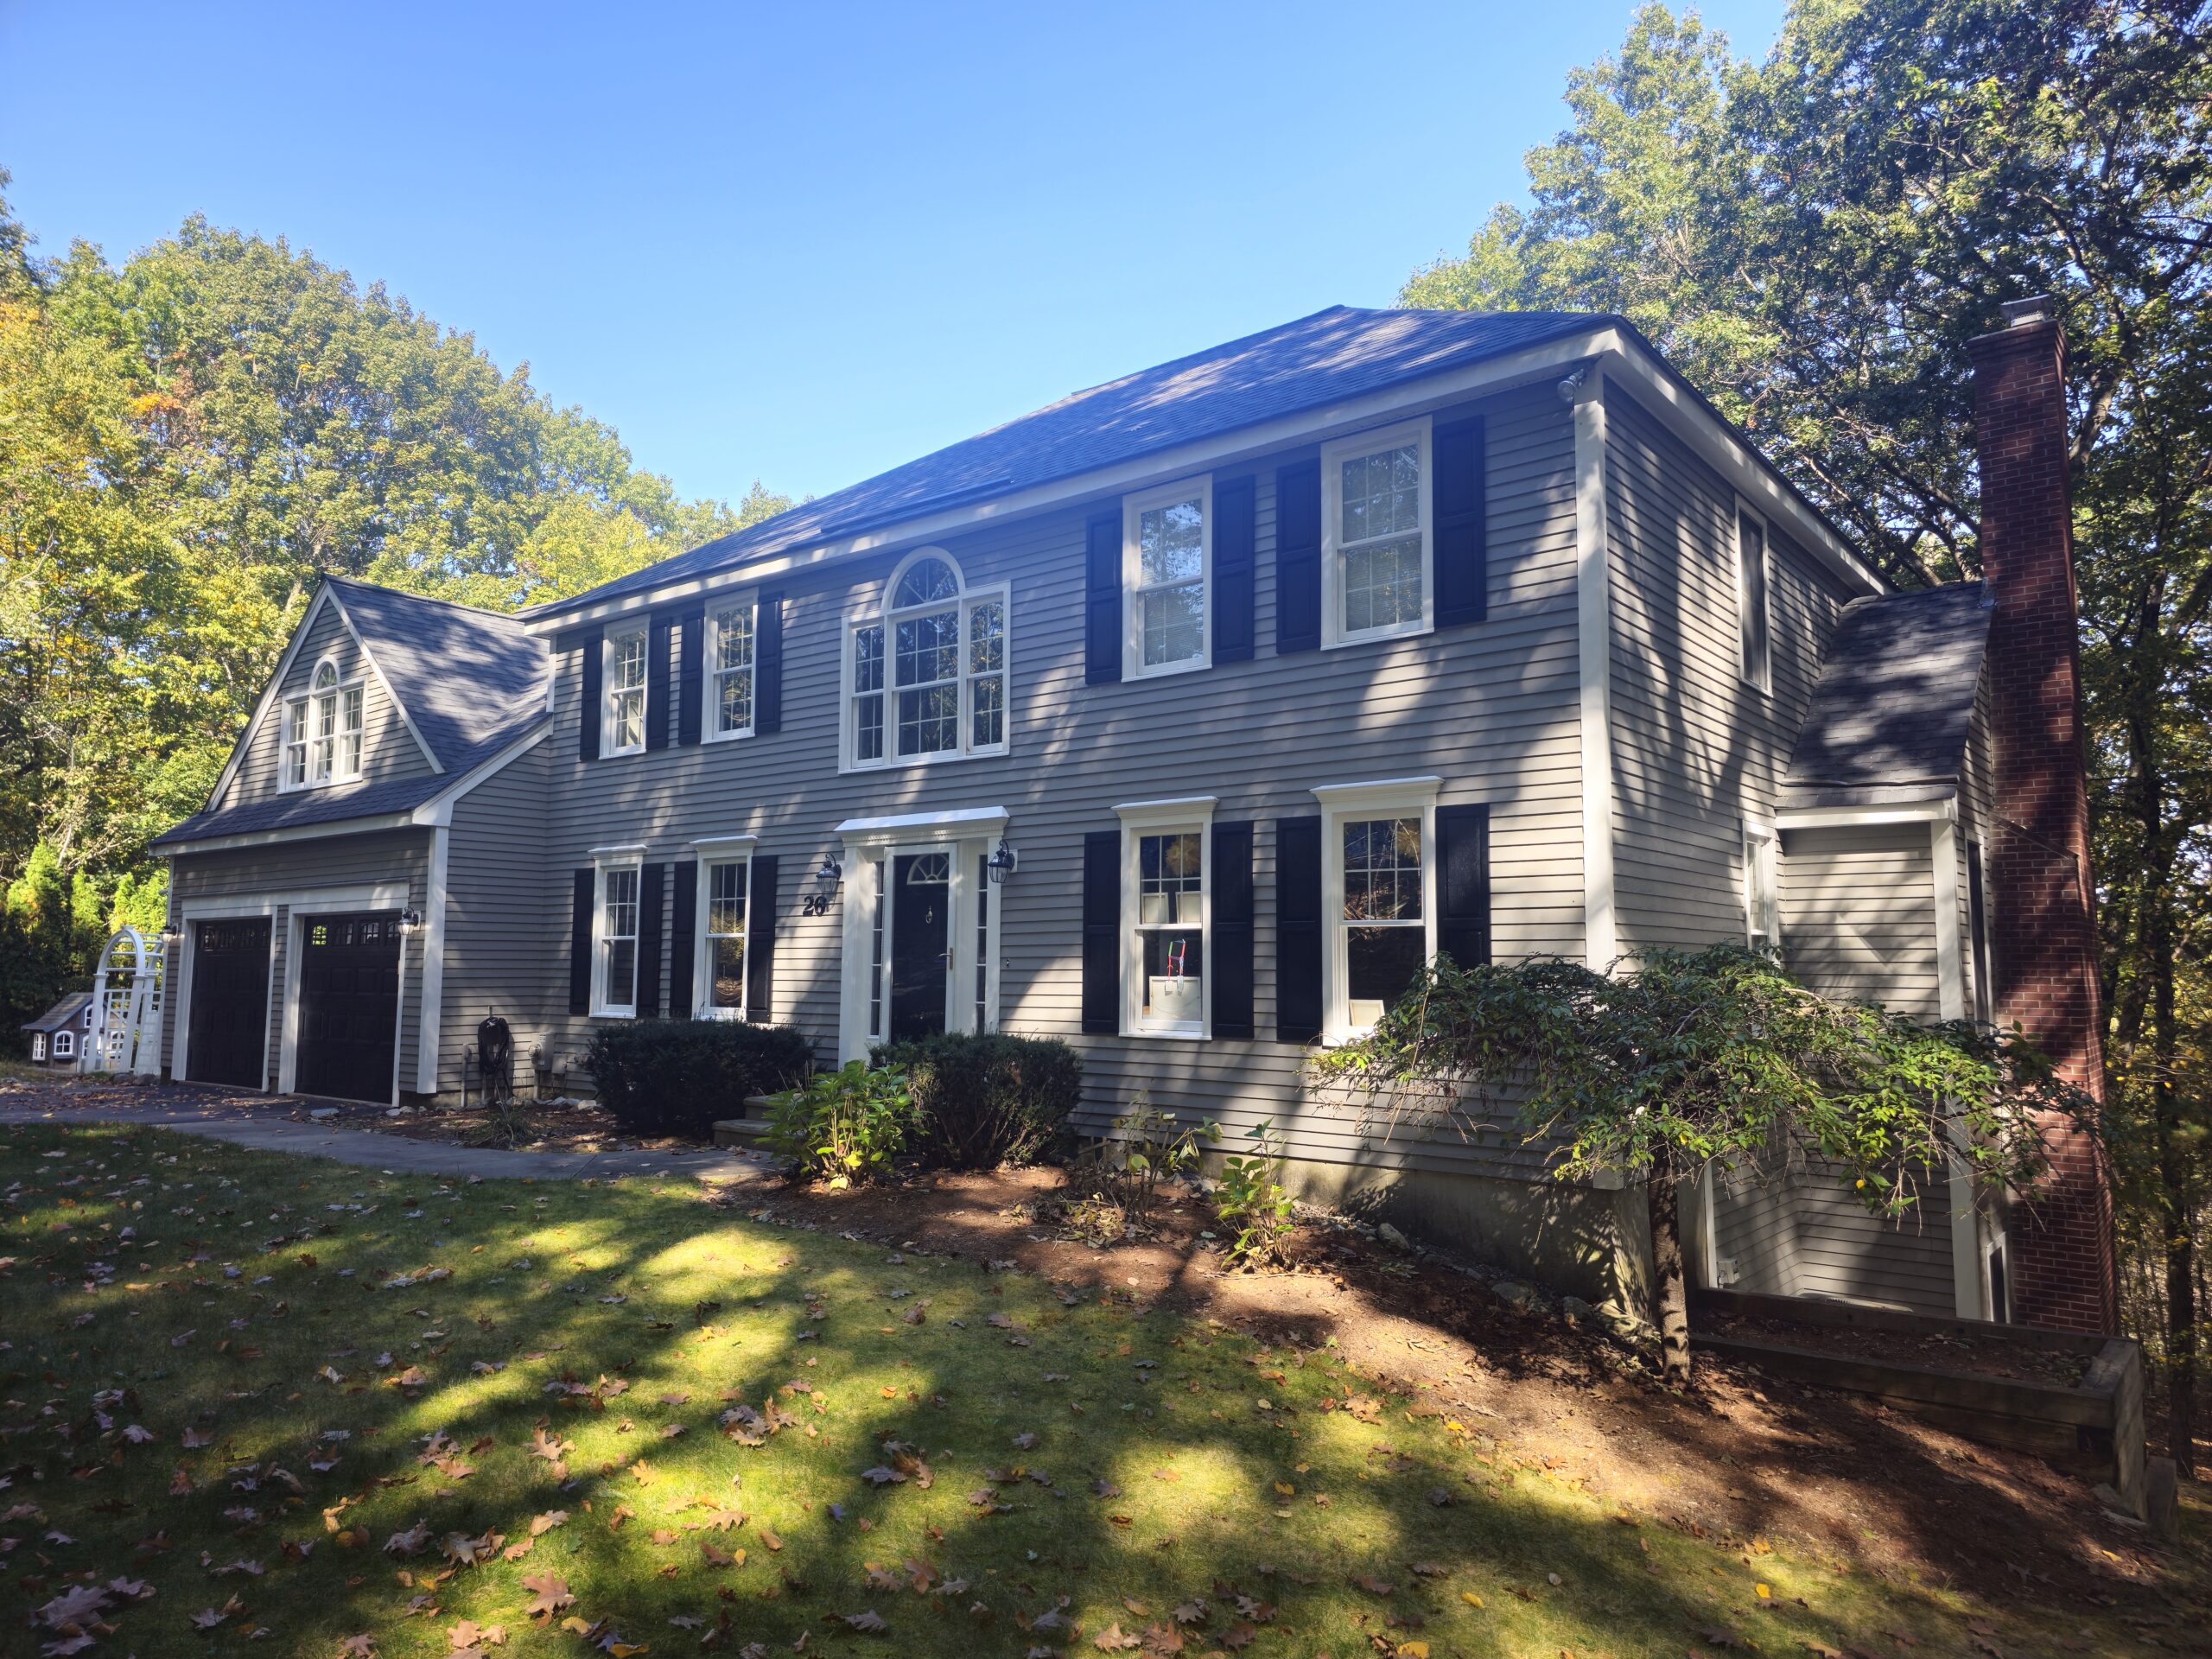 Professional exterior painting services in Westford, MA